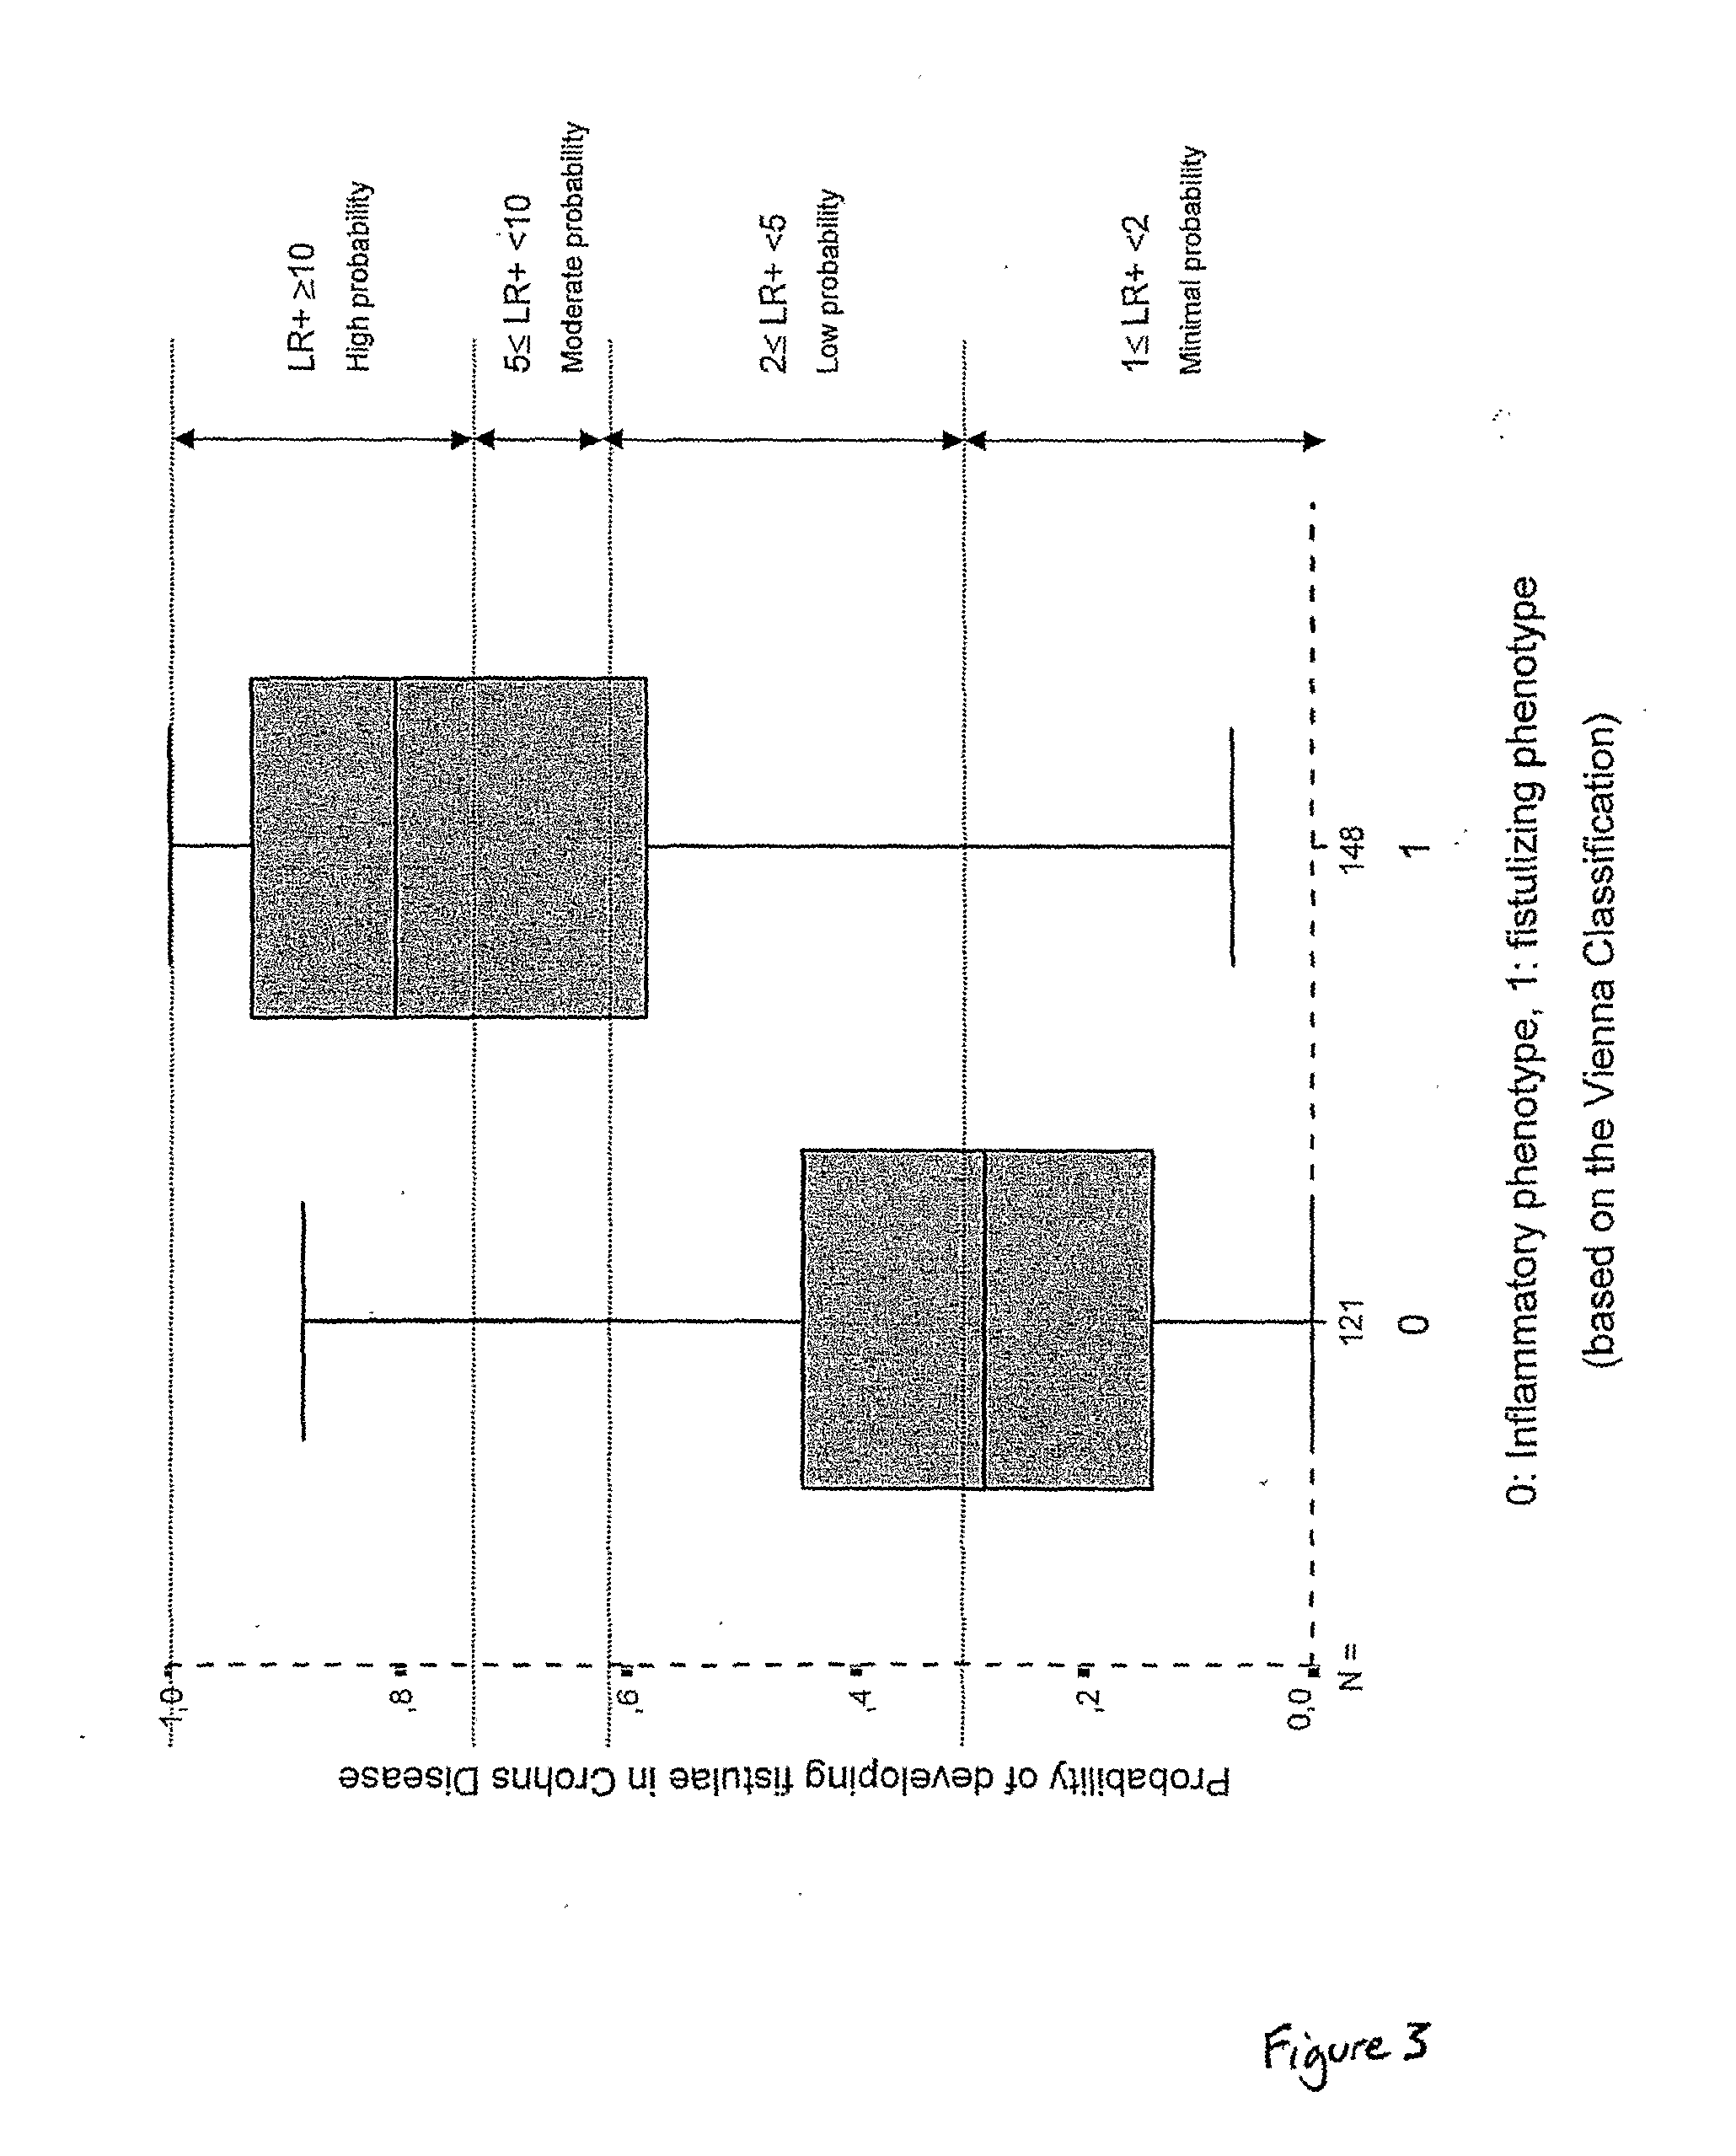 Methods and products for in vitro genotyping